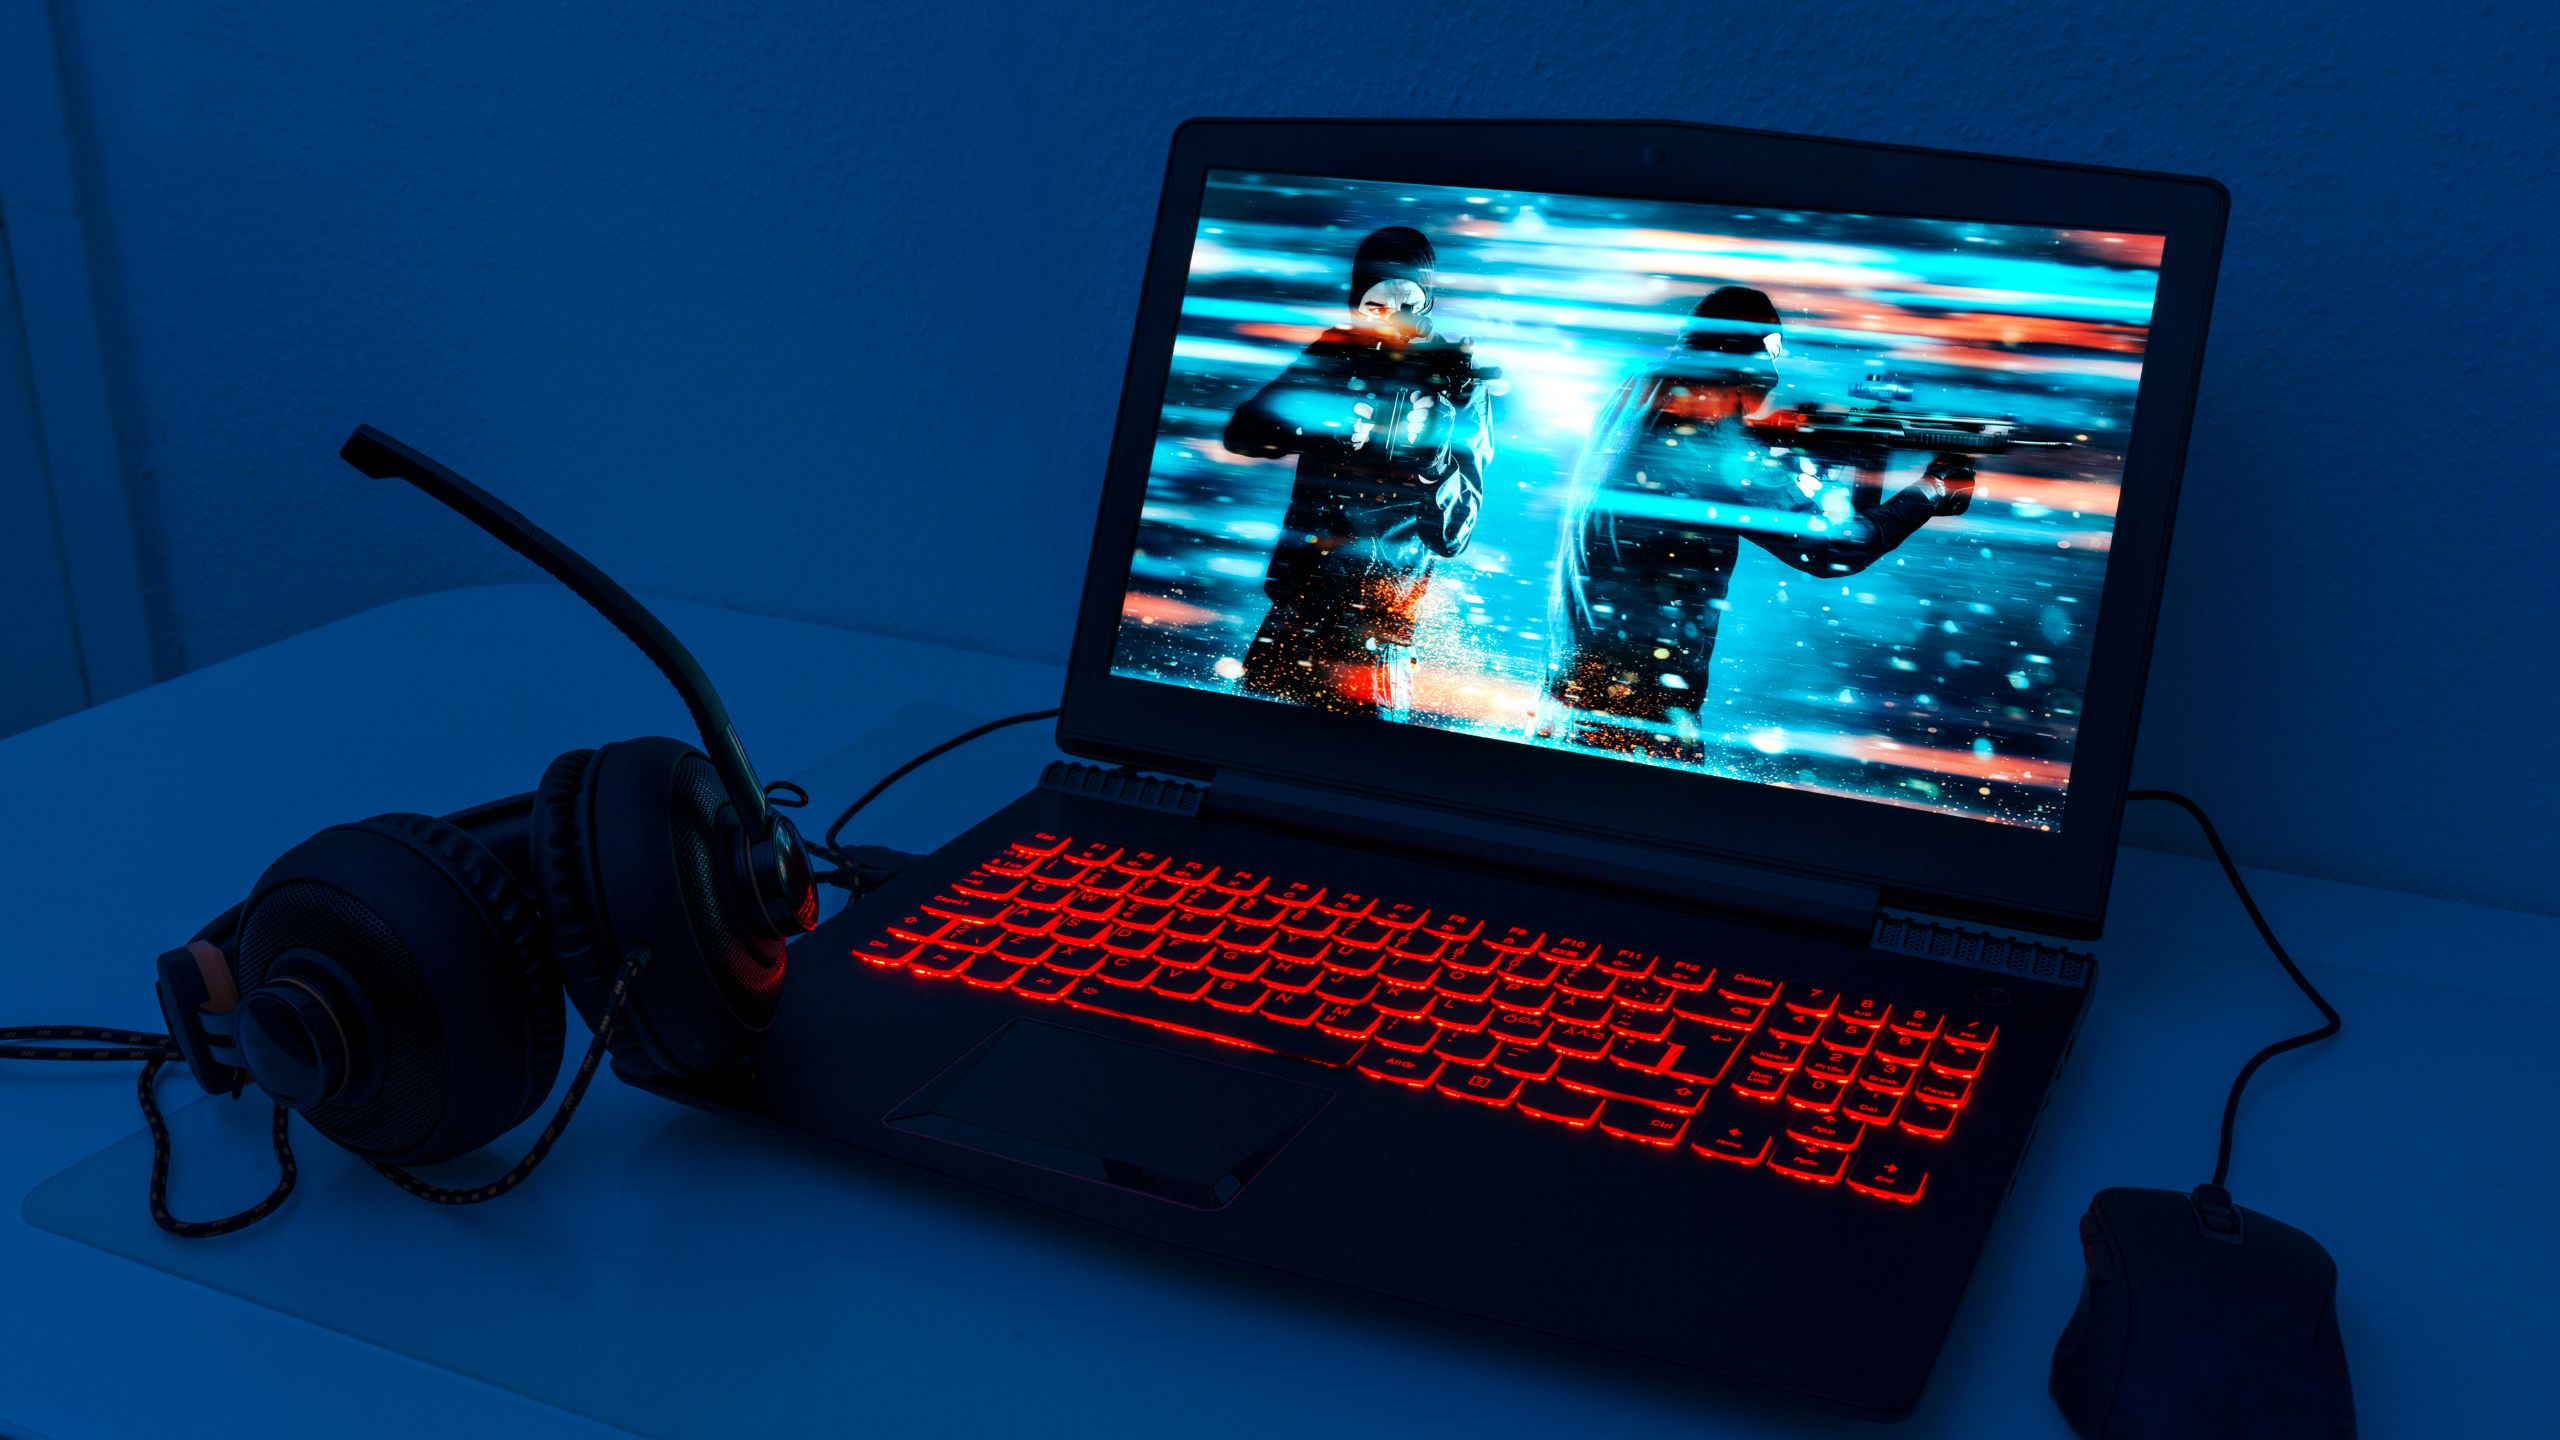 /5-best-budget-gaming-laptops-under-dollar500-pb233zqr feature image